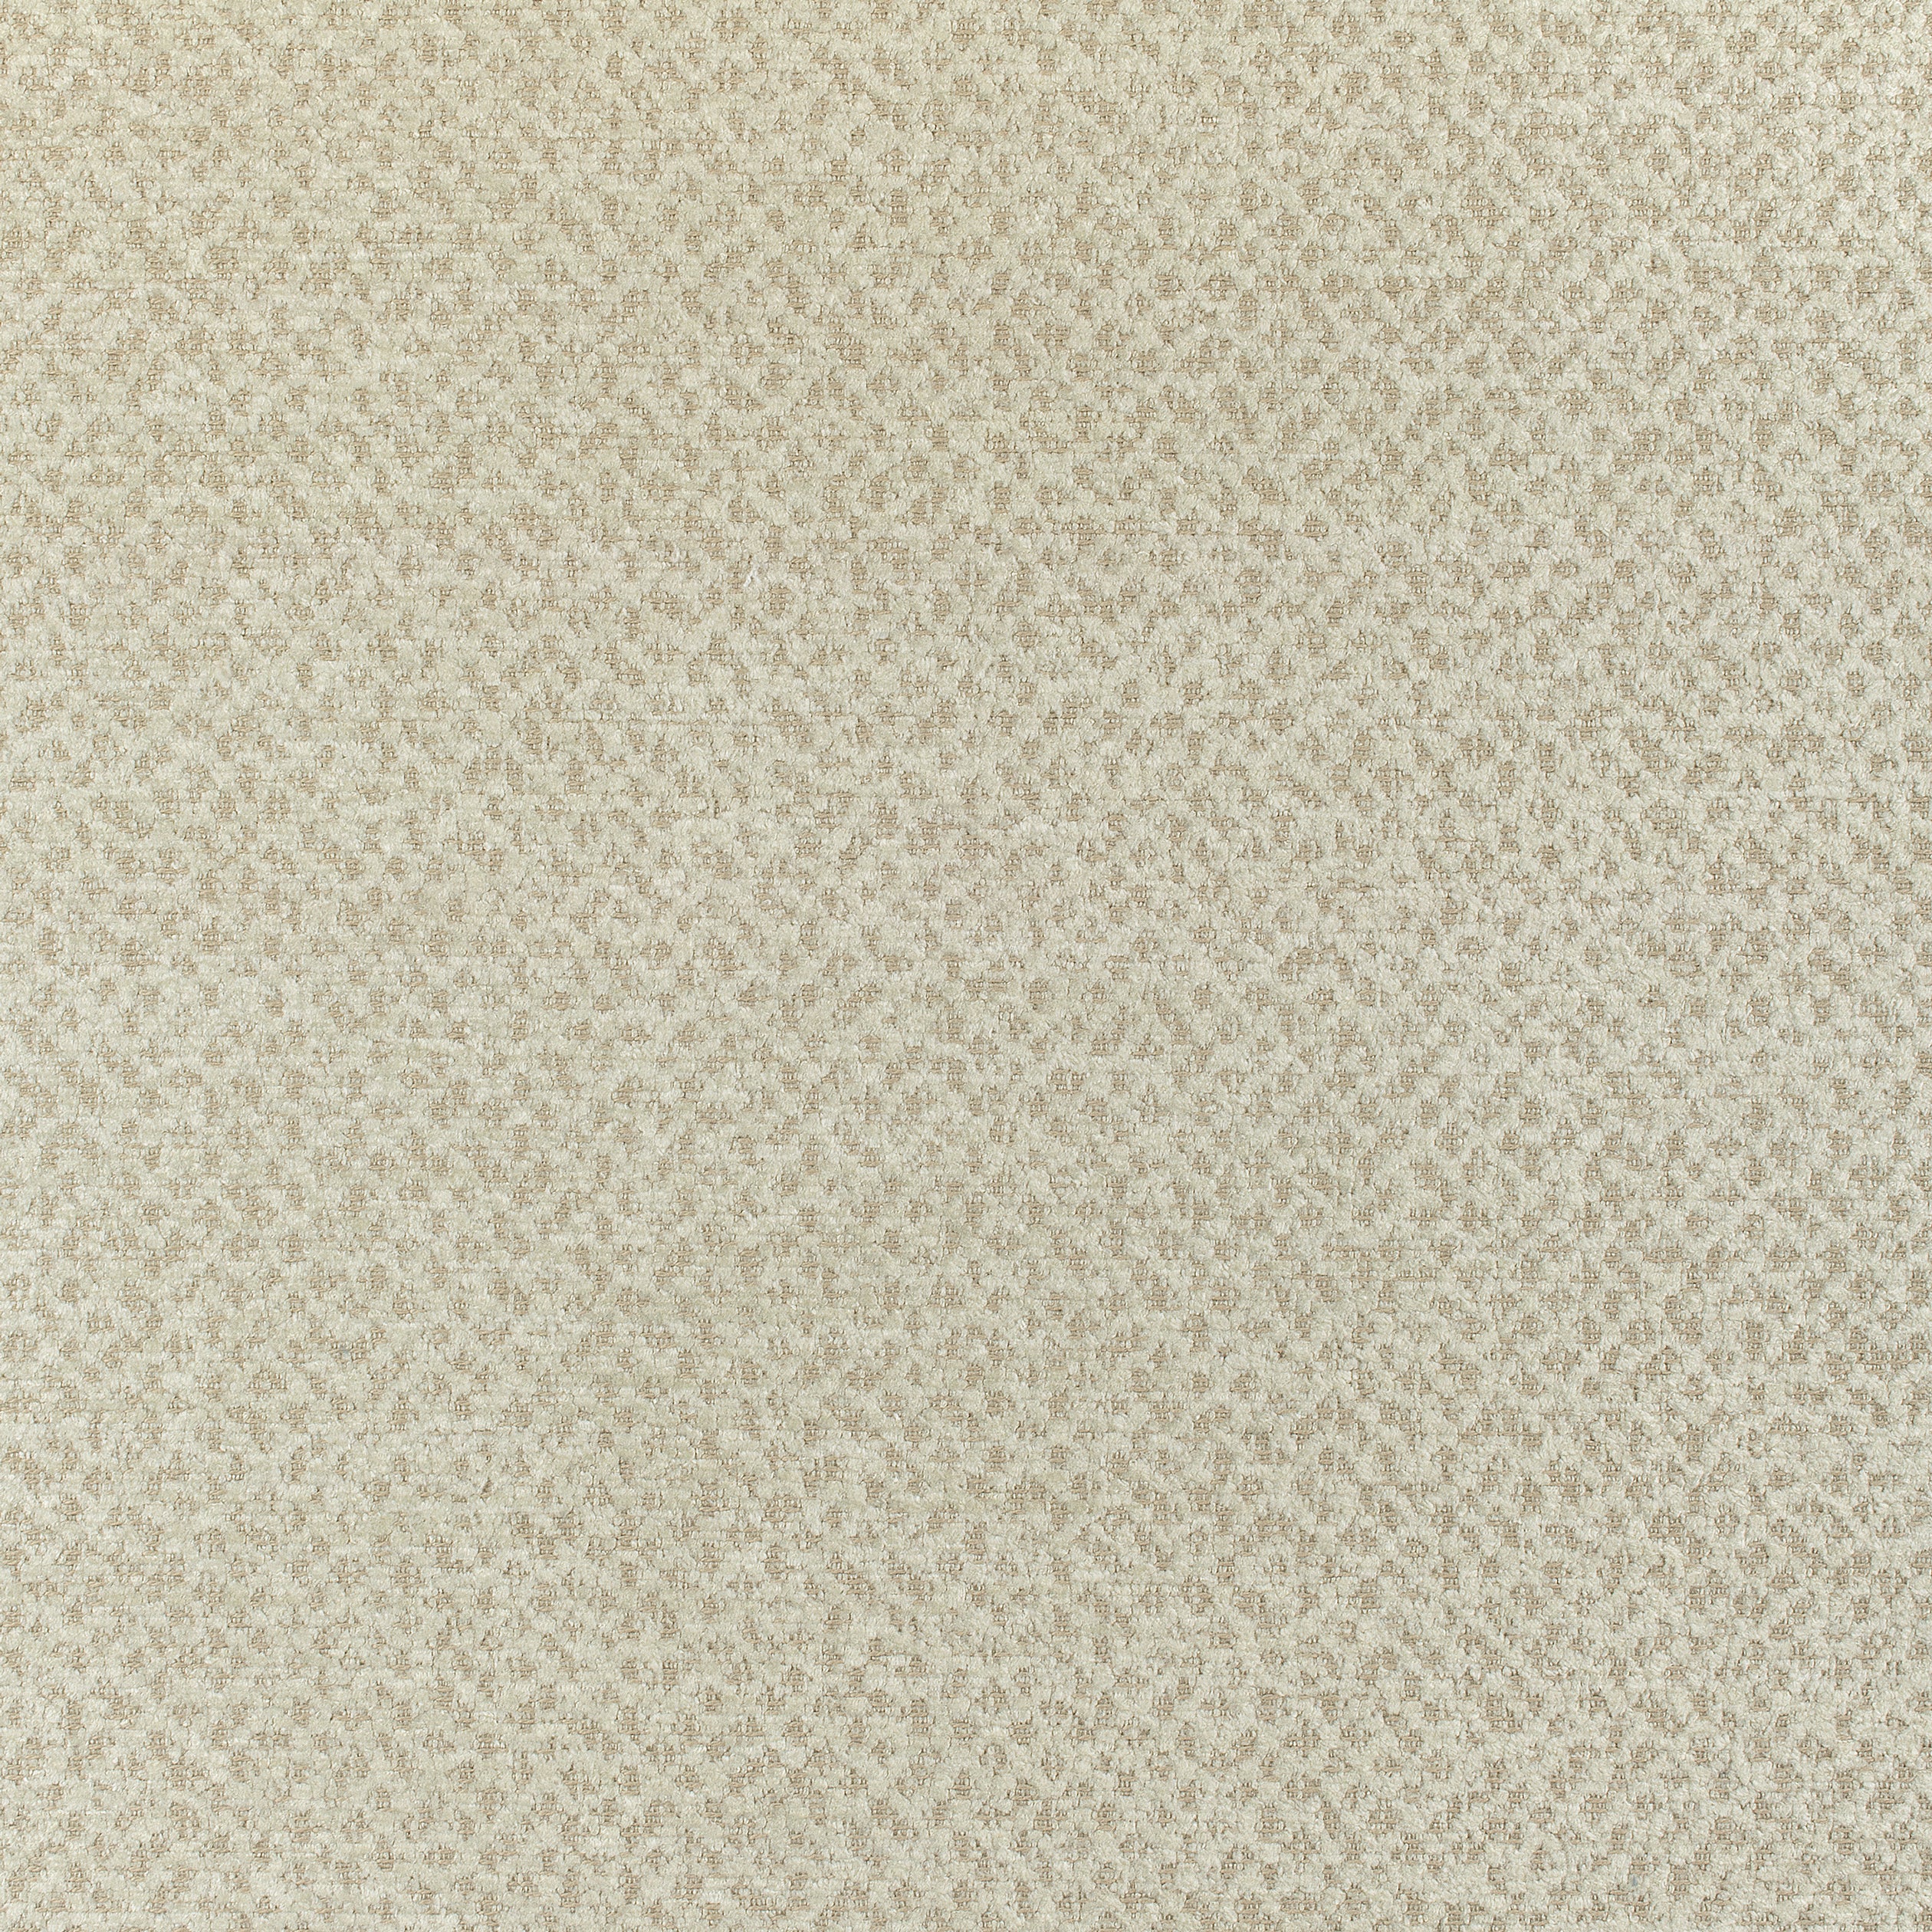 Gryffin fabric in flax color - pattern number W80410 - by Thibaut in the Mosaic collection